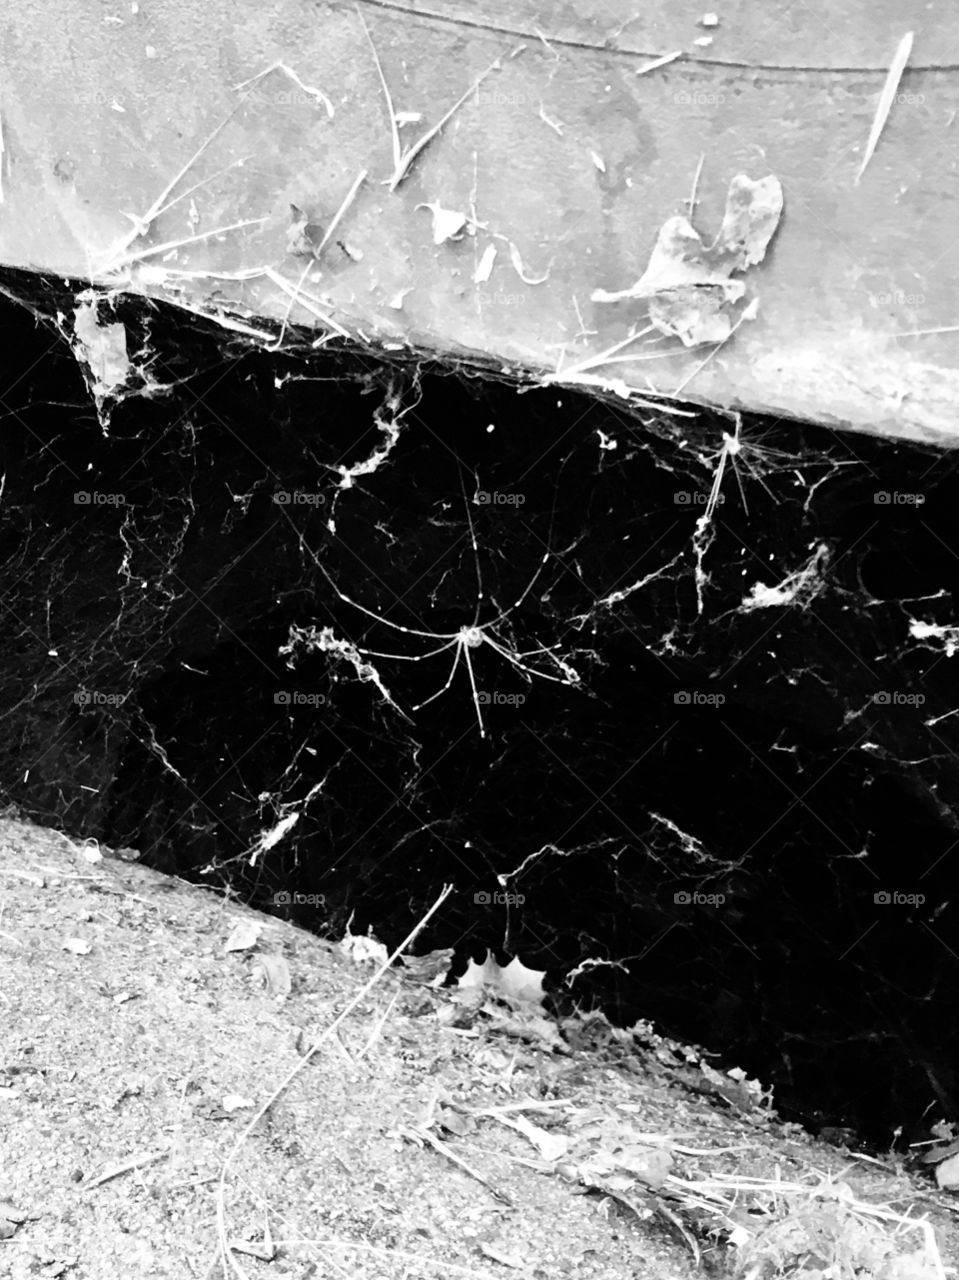 A black and white of a spider in its web in front of a gutter